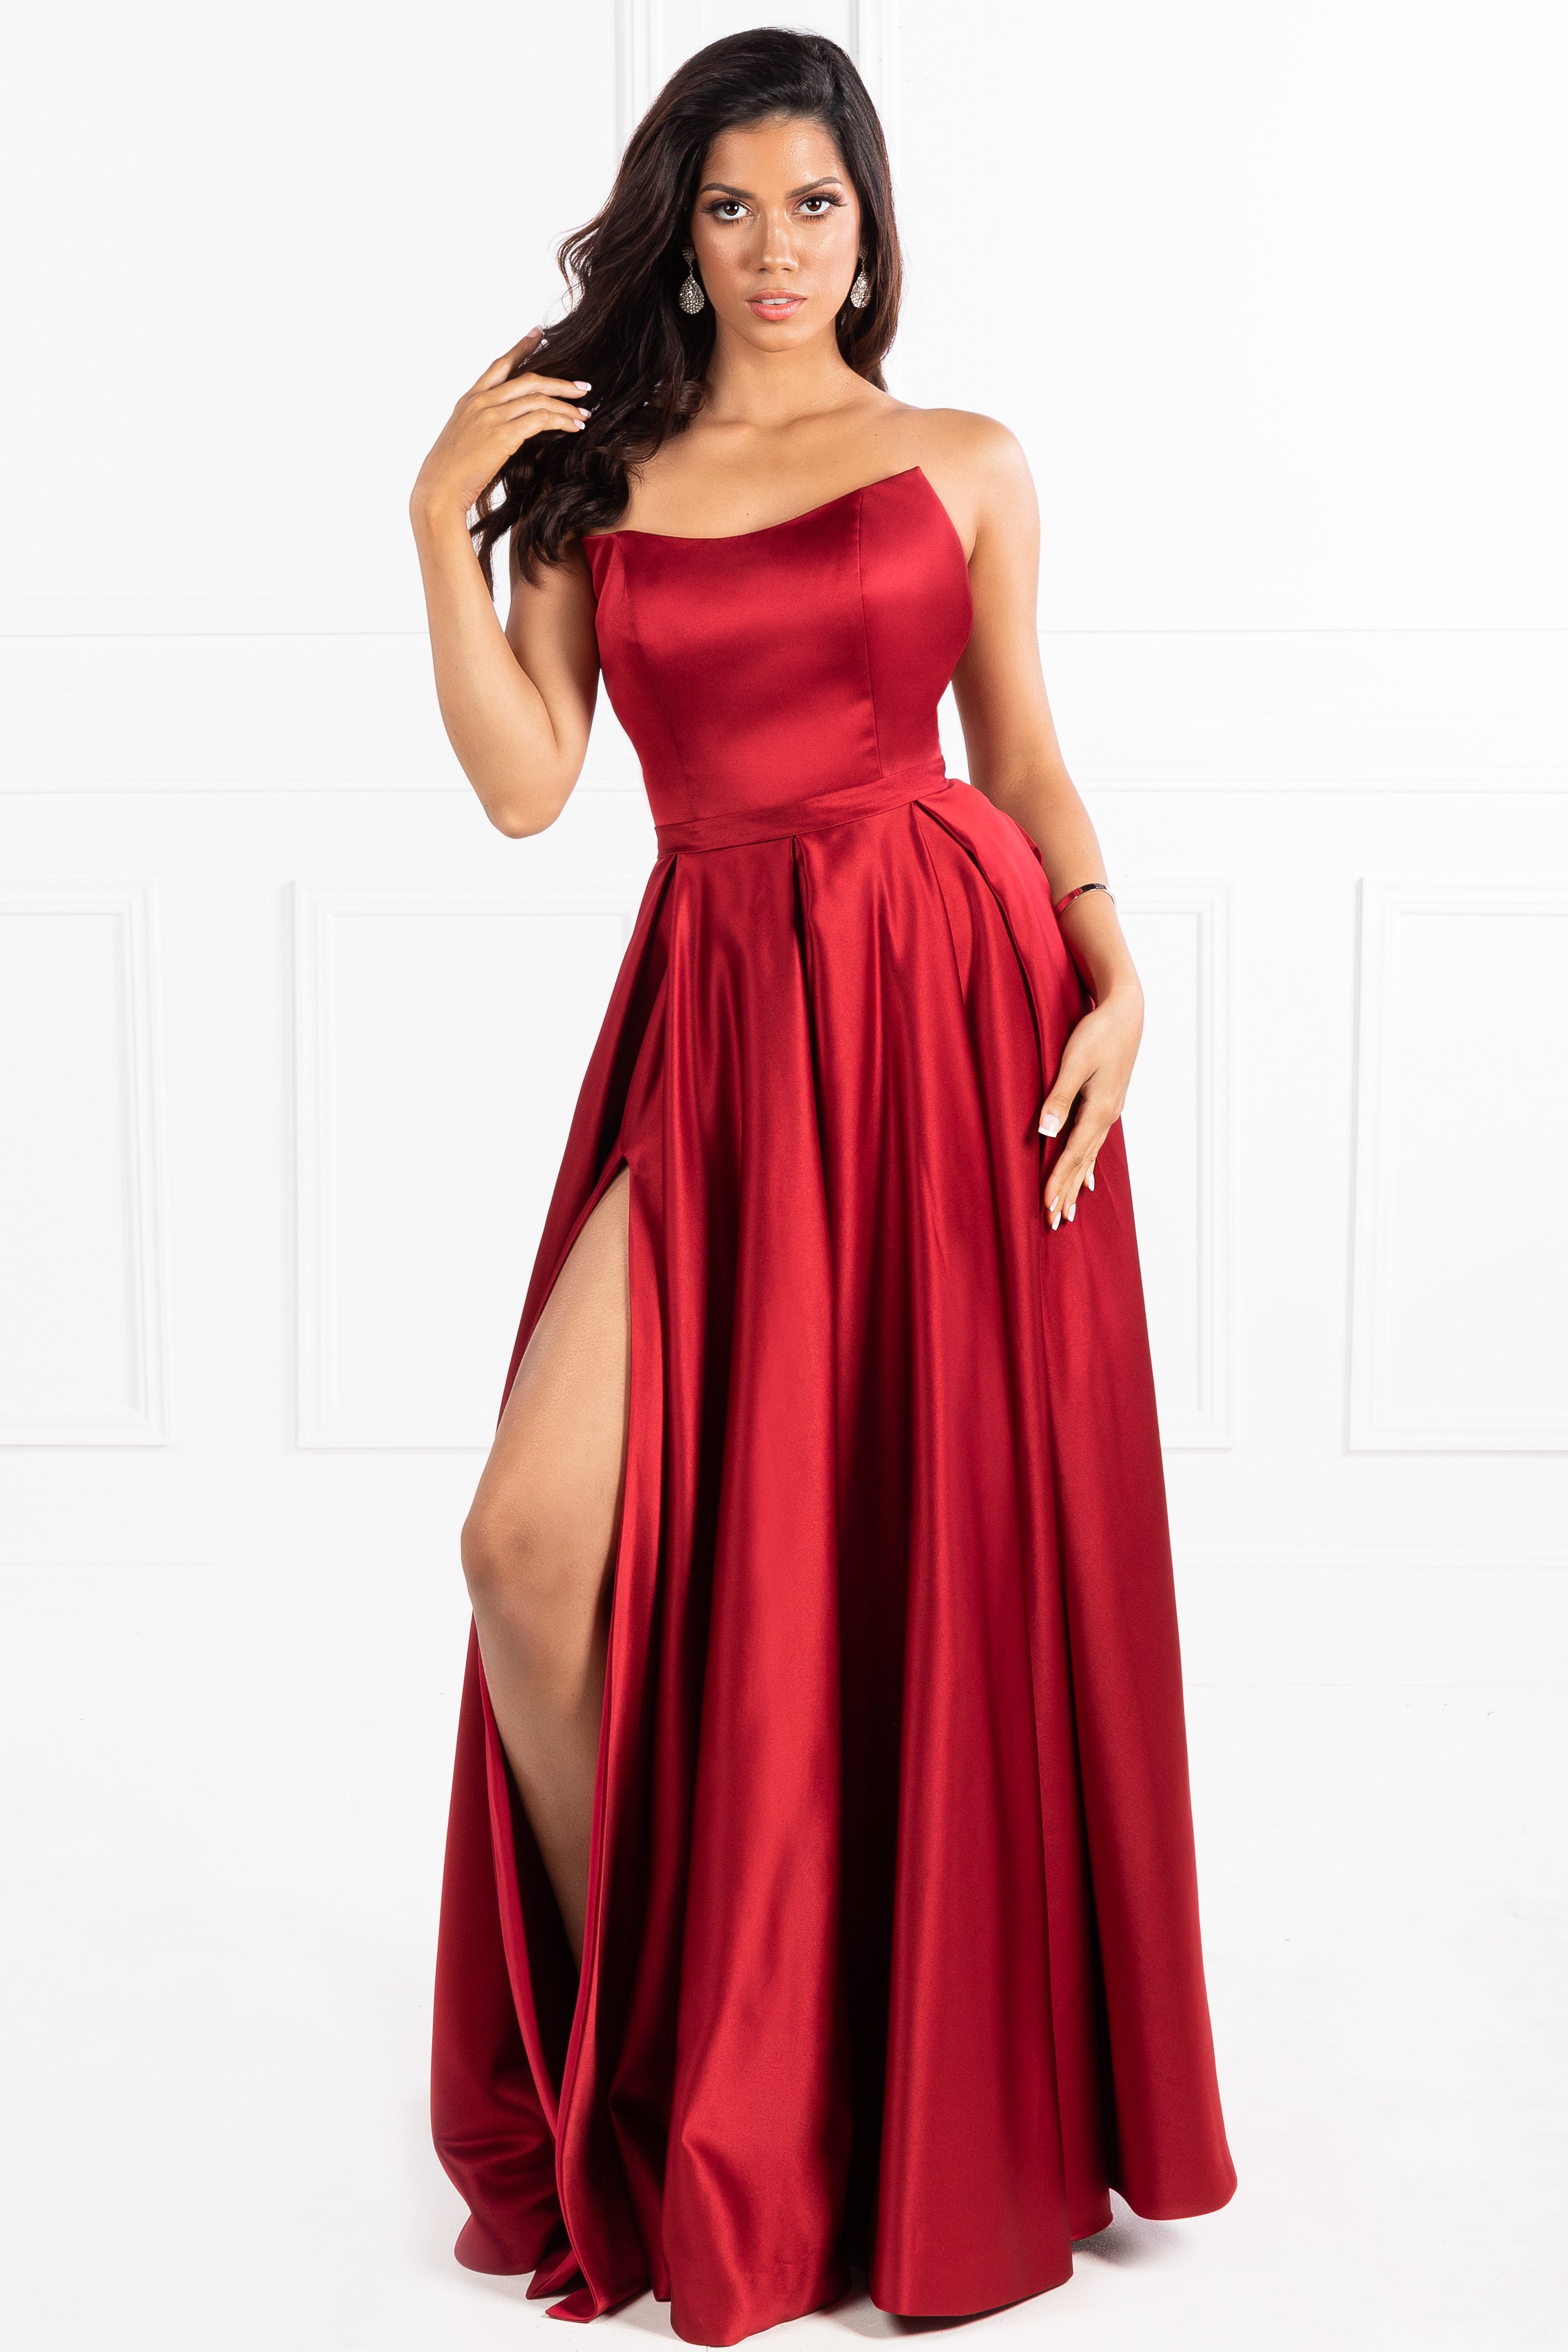 Honey Couture VICTORIA Strapless Custom Made Formal Dress {vendor} AfterPay Humm ZipPay LayBuy Sezzle